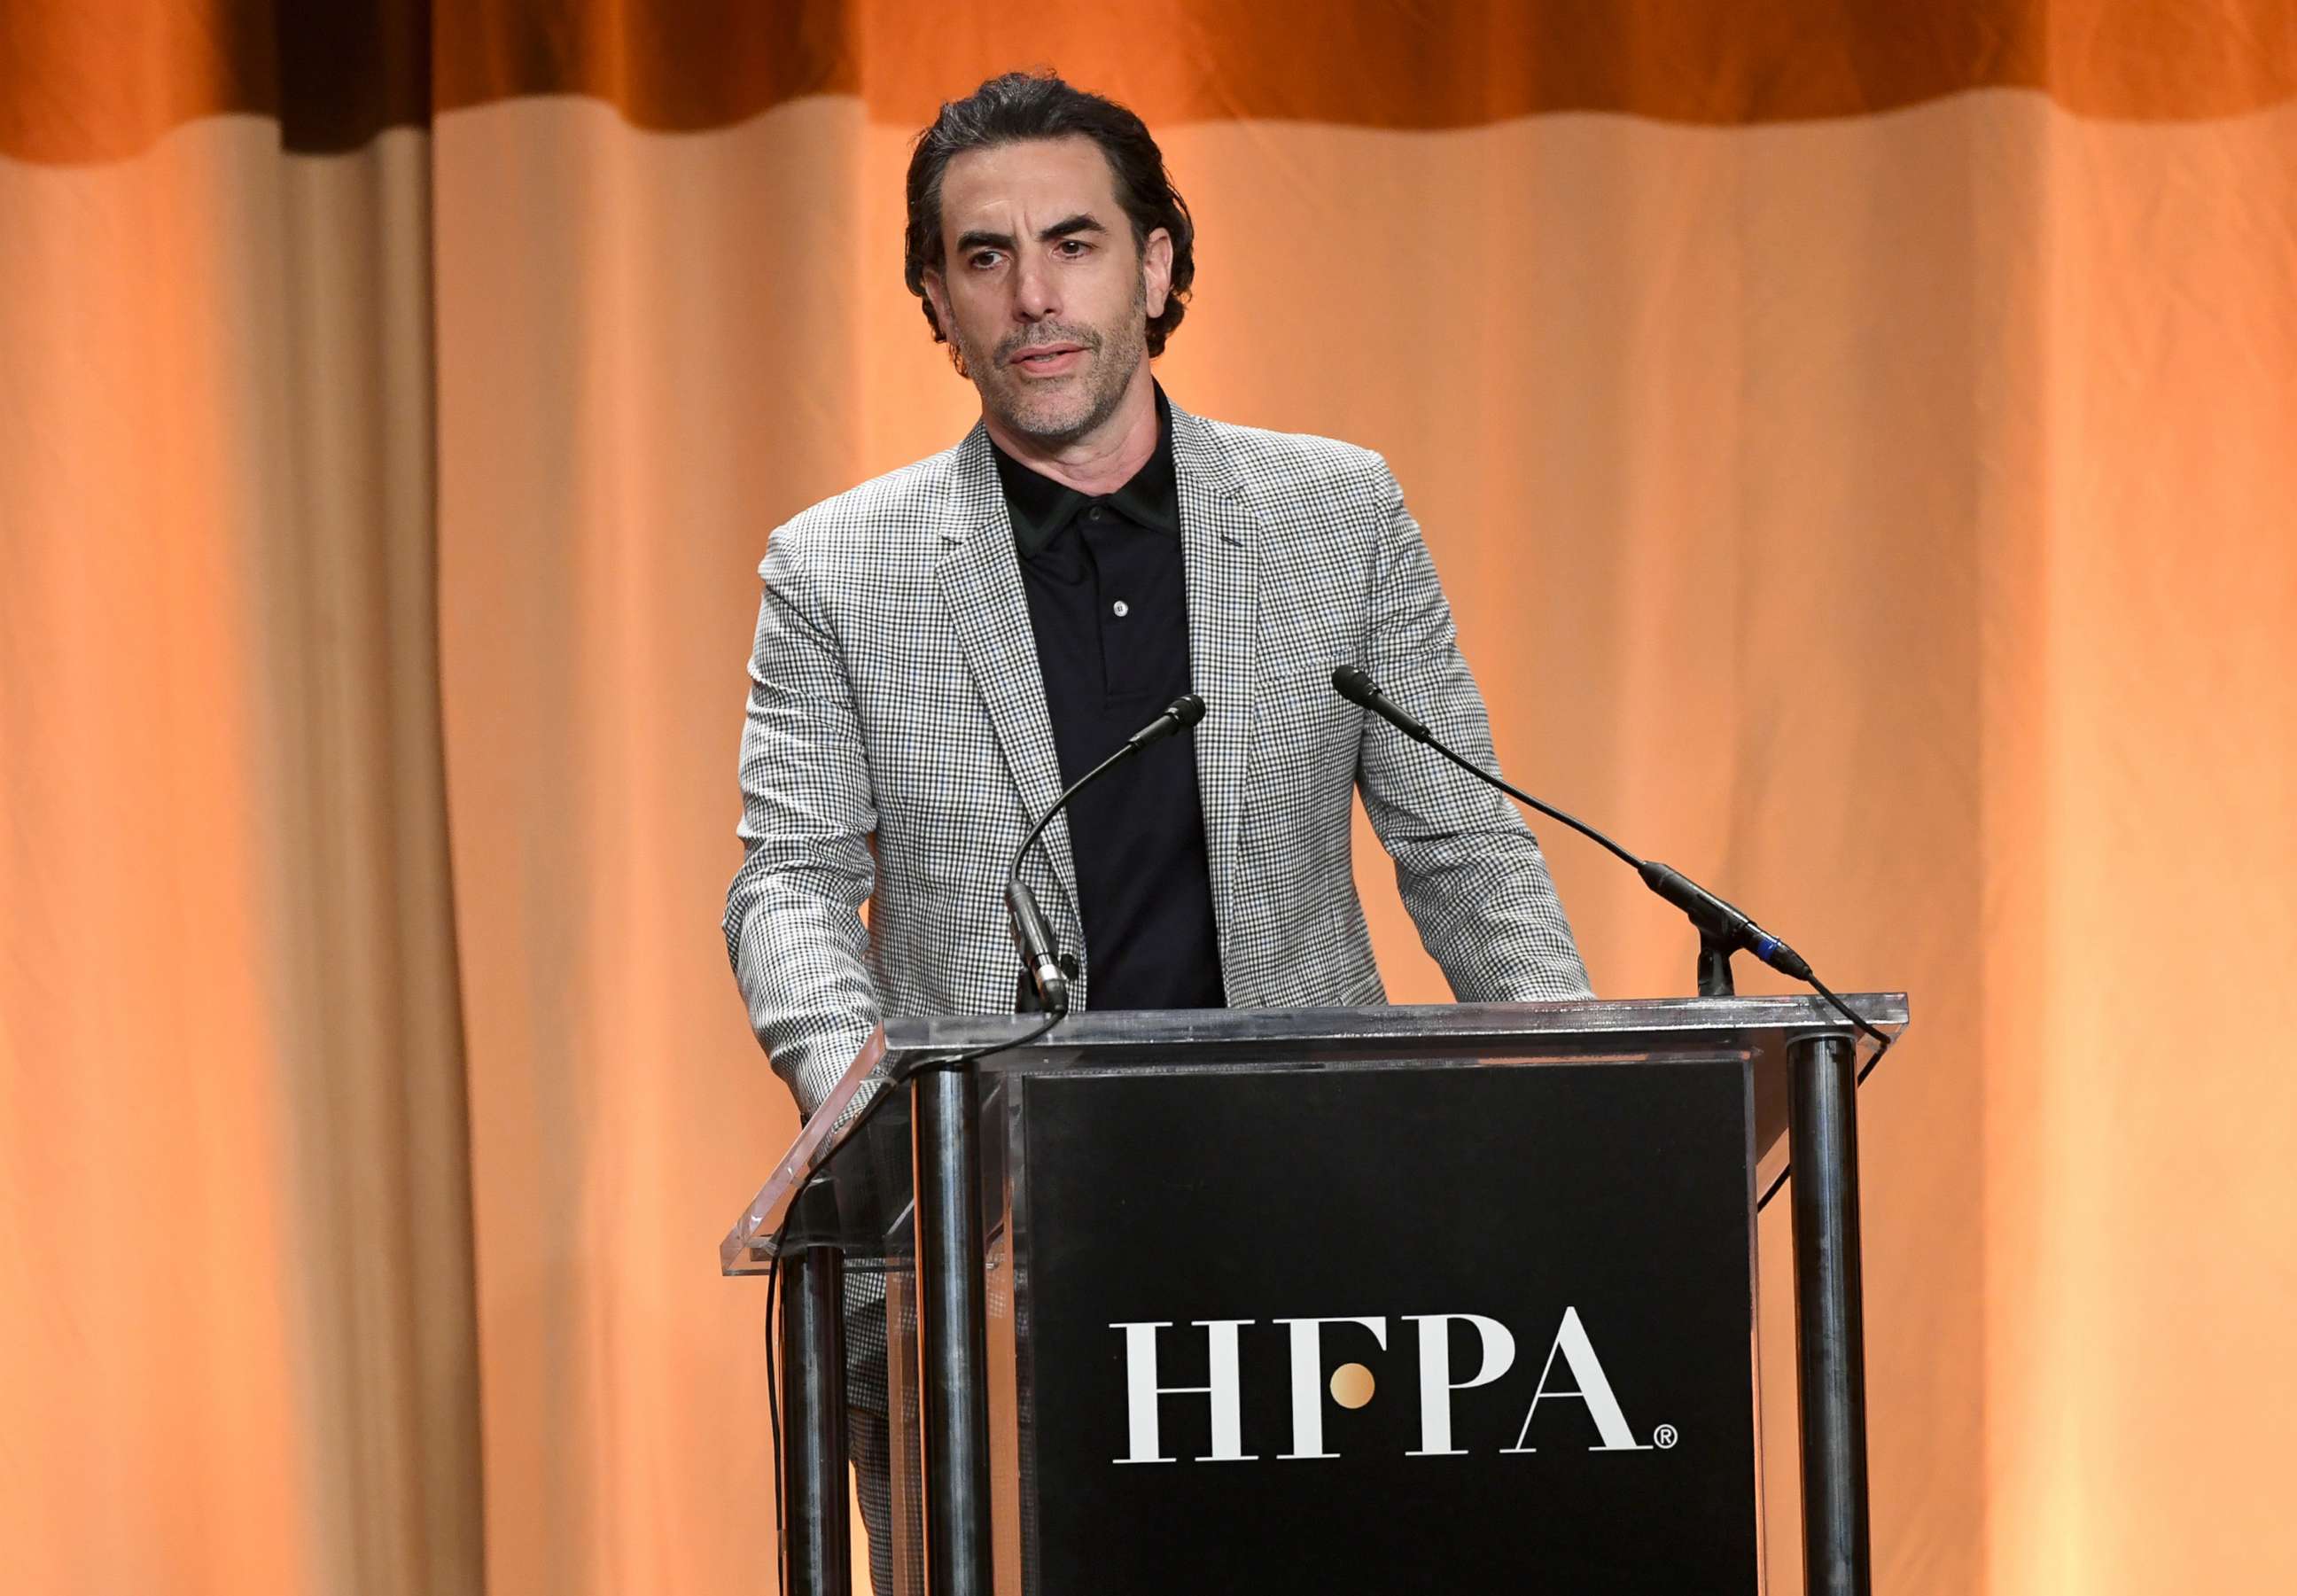 PHOTO: In this July 31, 2019, file photo, Sacha Baron Cohen speaks onstage during Hollywood Foreign Press Association's Annual Grants Banquet in Beverly Hills, Calif.